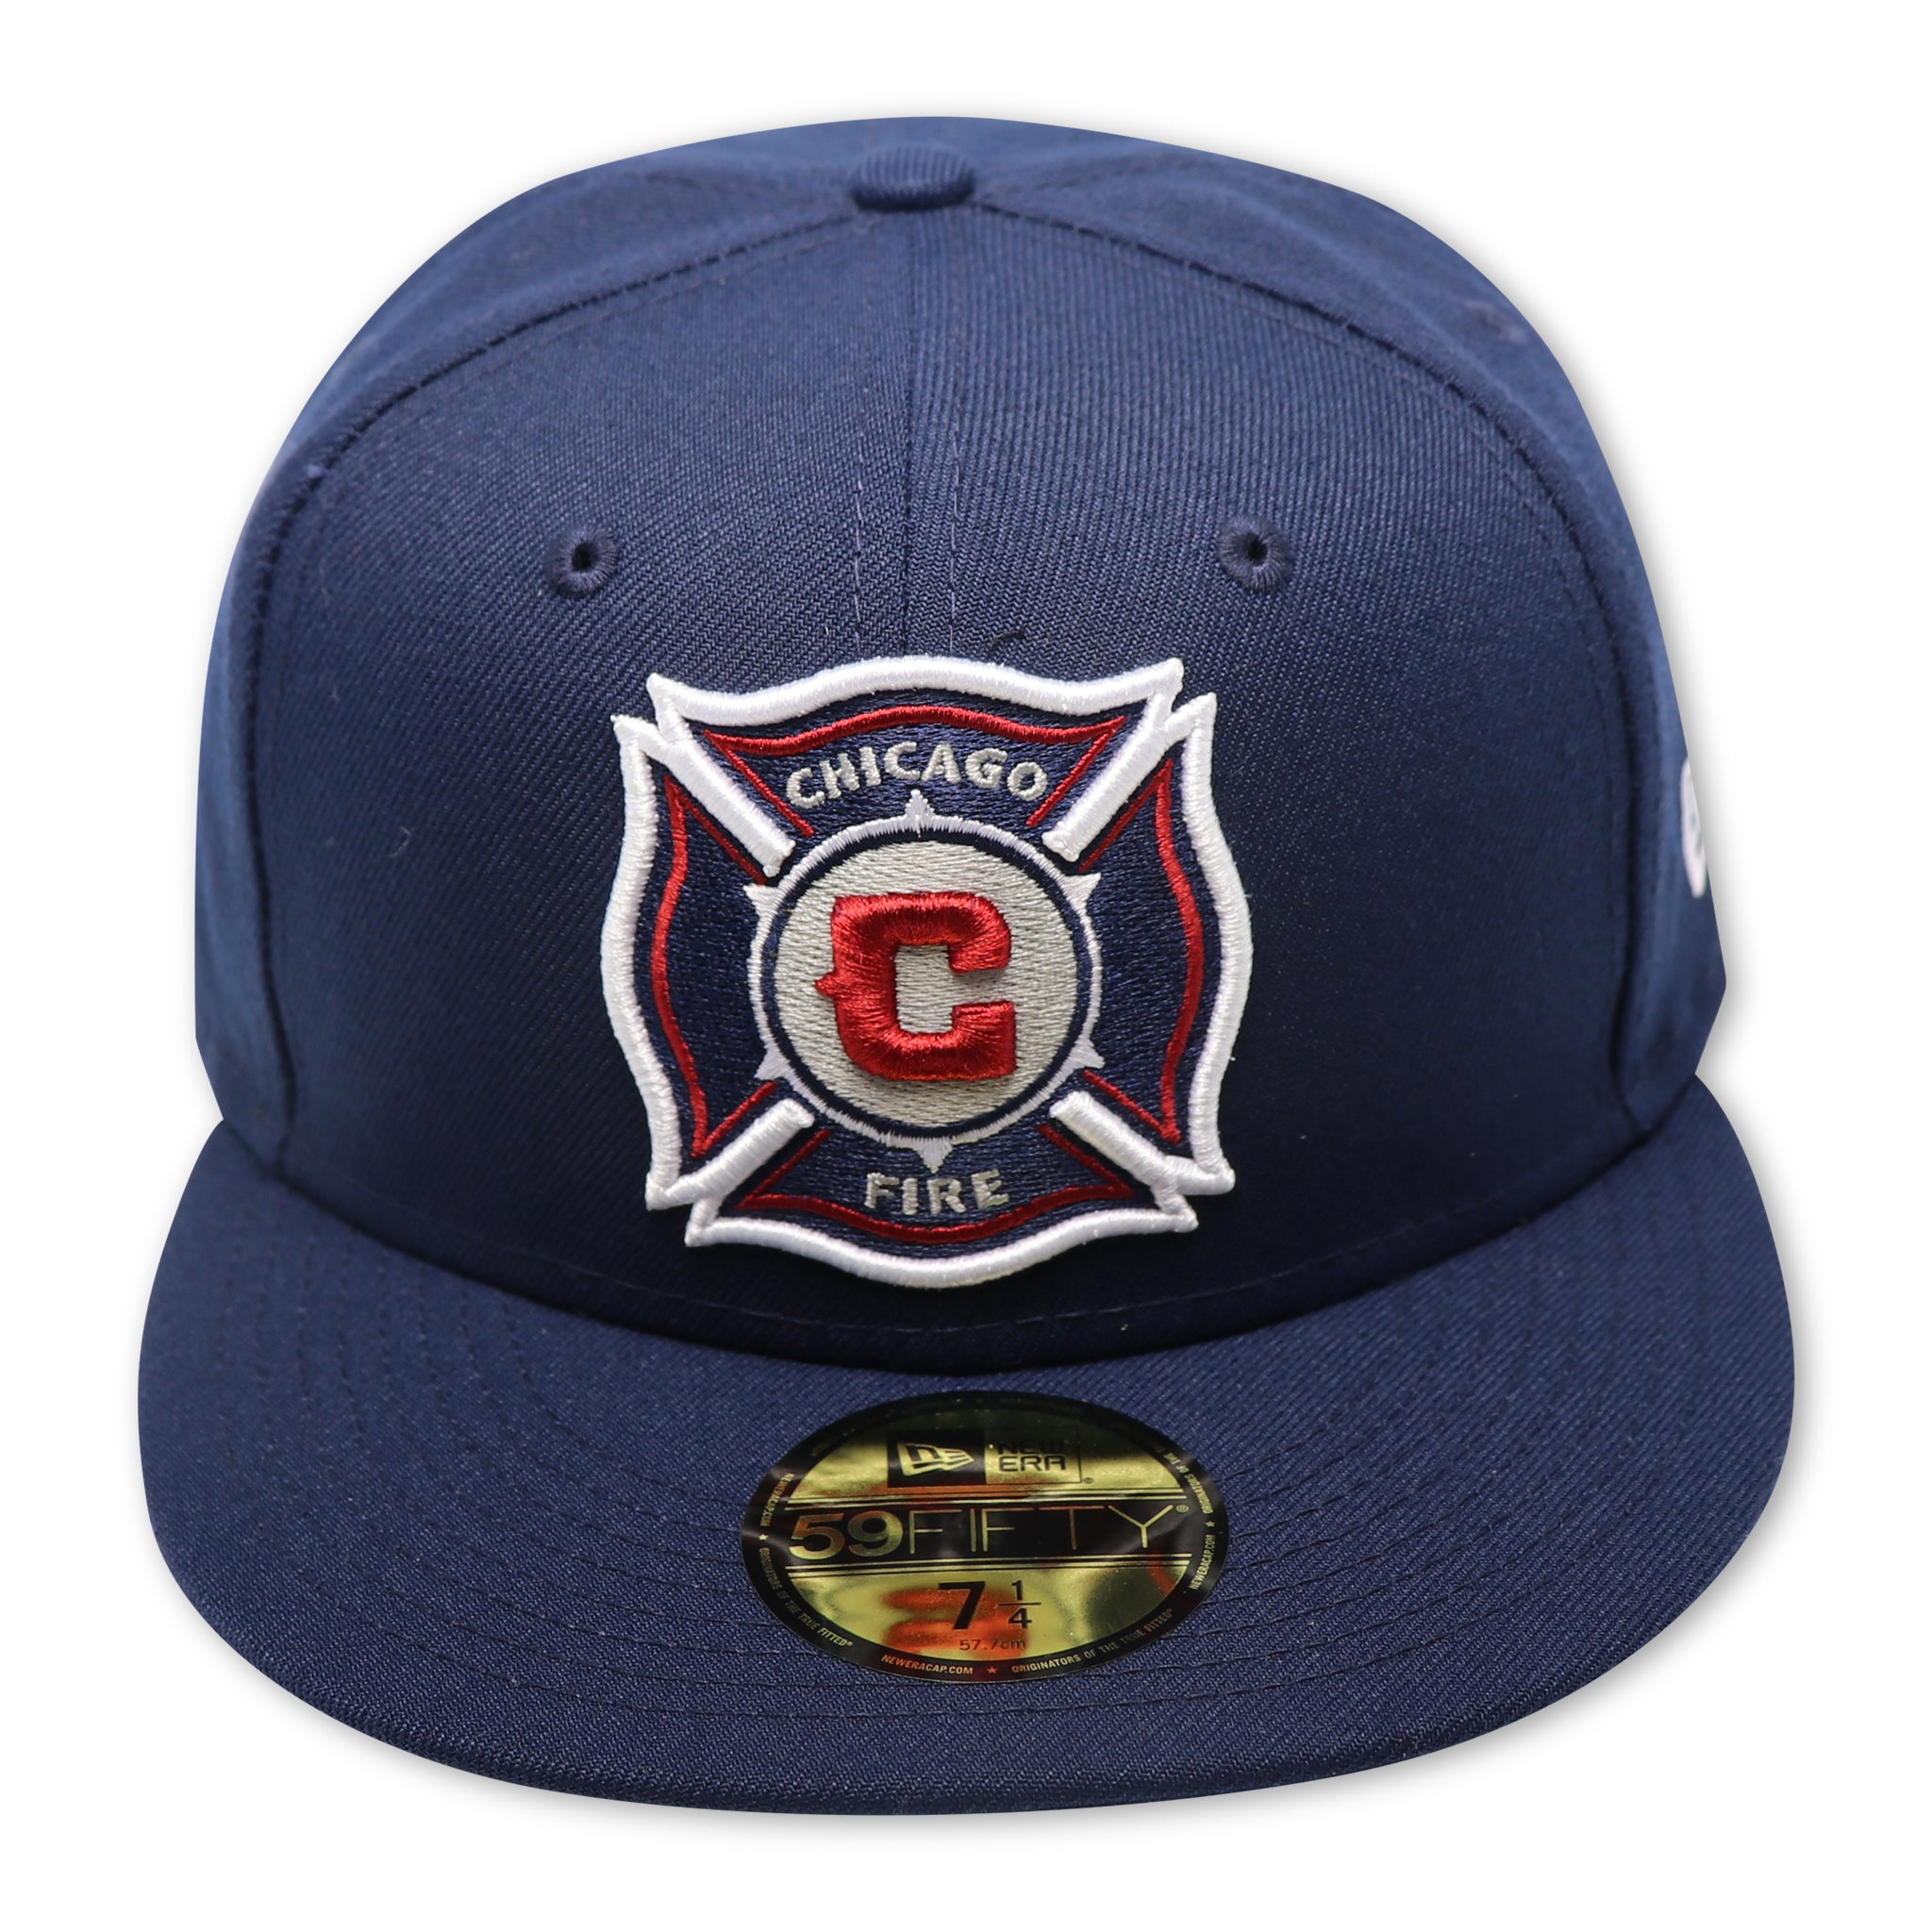 CHICAGO FIRE FC NEW ERA 59FIFTY FITTED